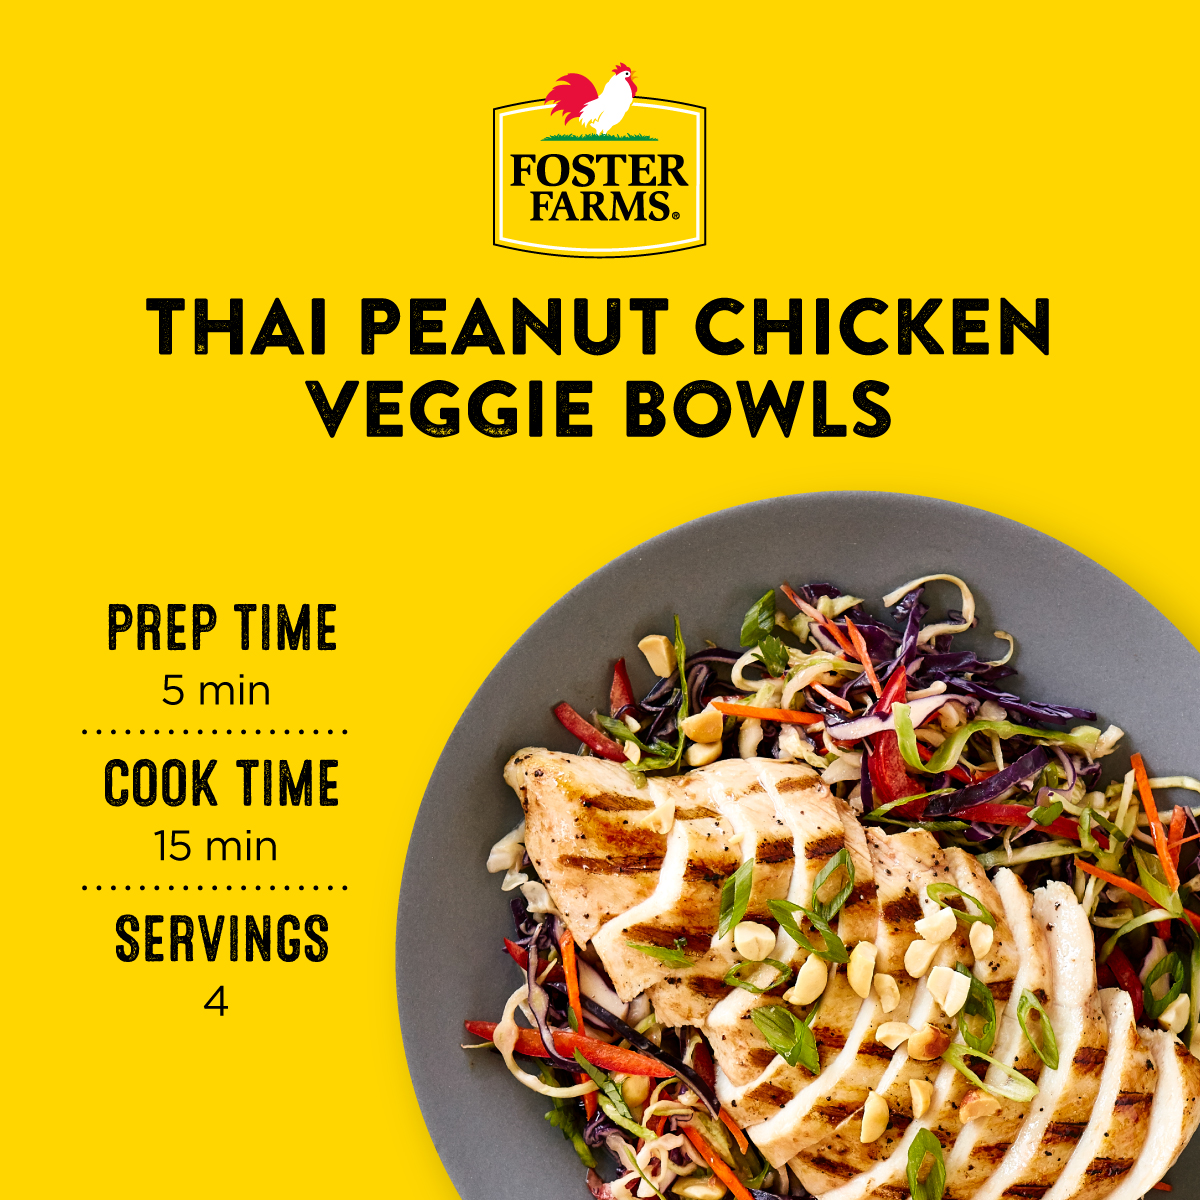 Attention Peanut Lovers! Our Thai Peanut Chicken Veggie Bowl recipe is quick, delicious, & nutty. Recipe: bit.ly/3TEx1nF #fosterfarms #nationalpeanutloversday #peanutlovers #thai #chicken #veggie #chickenrecipes #lunch #dinner #dinnerideas #dinnerrecipes #food #foodie